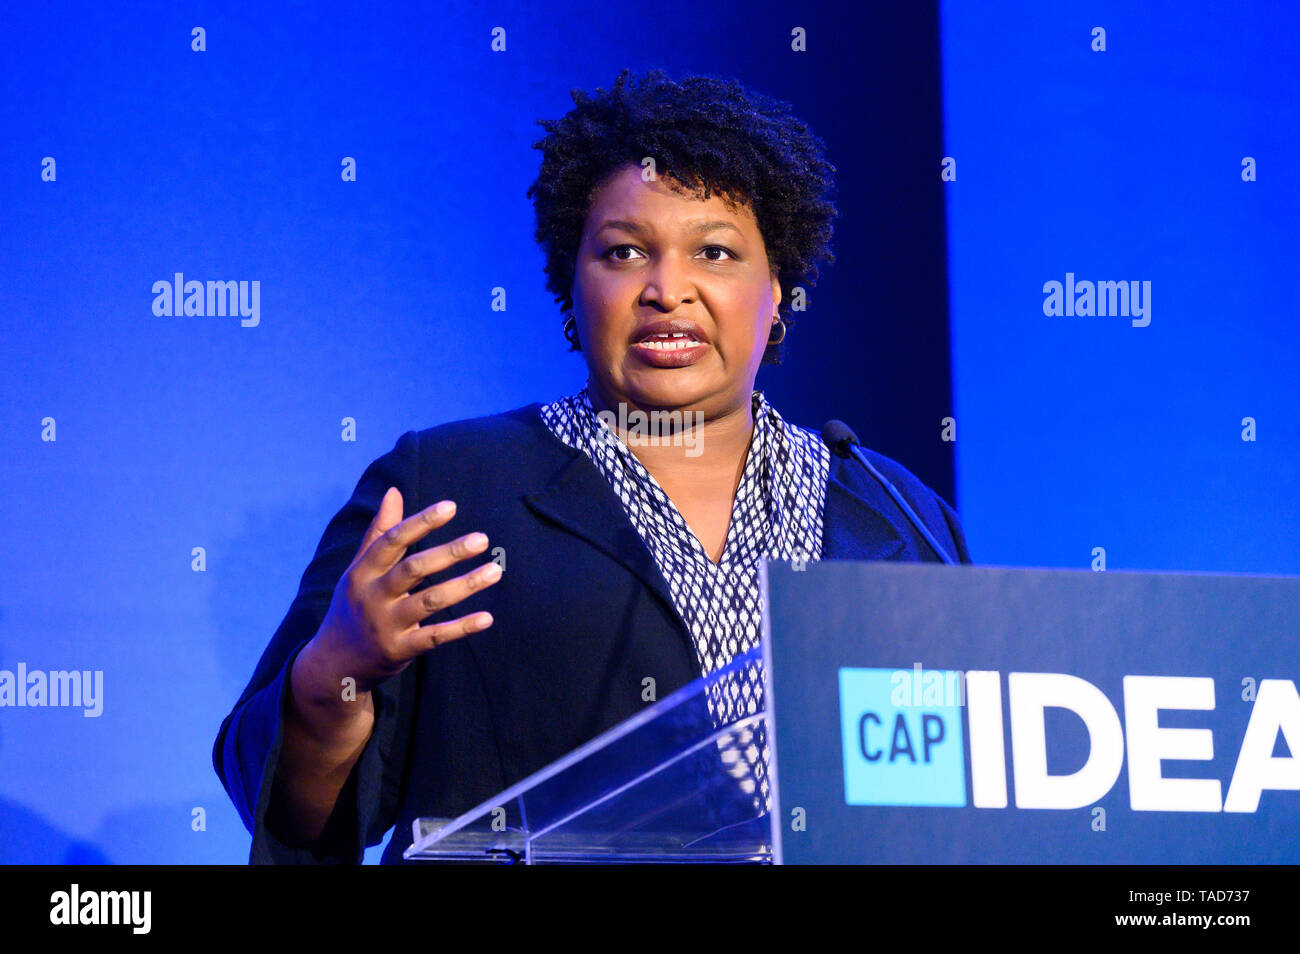 Stacey Abrams, Founder, Fair Fight Action, speaking at The Center for American Progress CAP 2019 Ideas Conference. Stock Photo